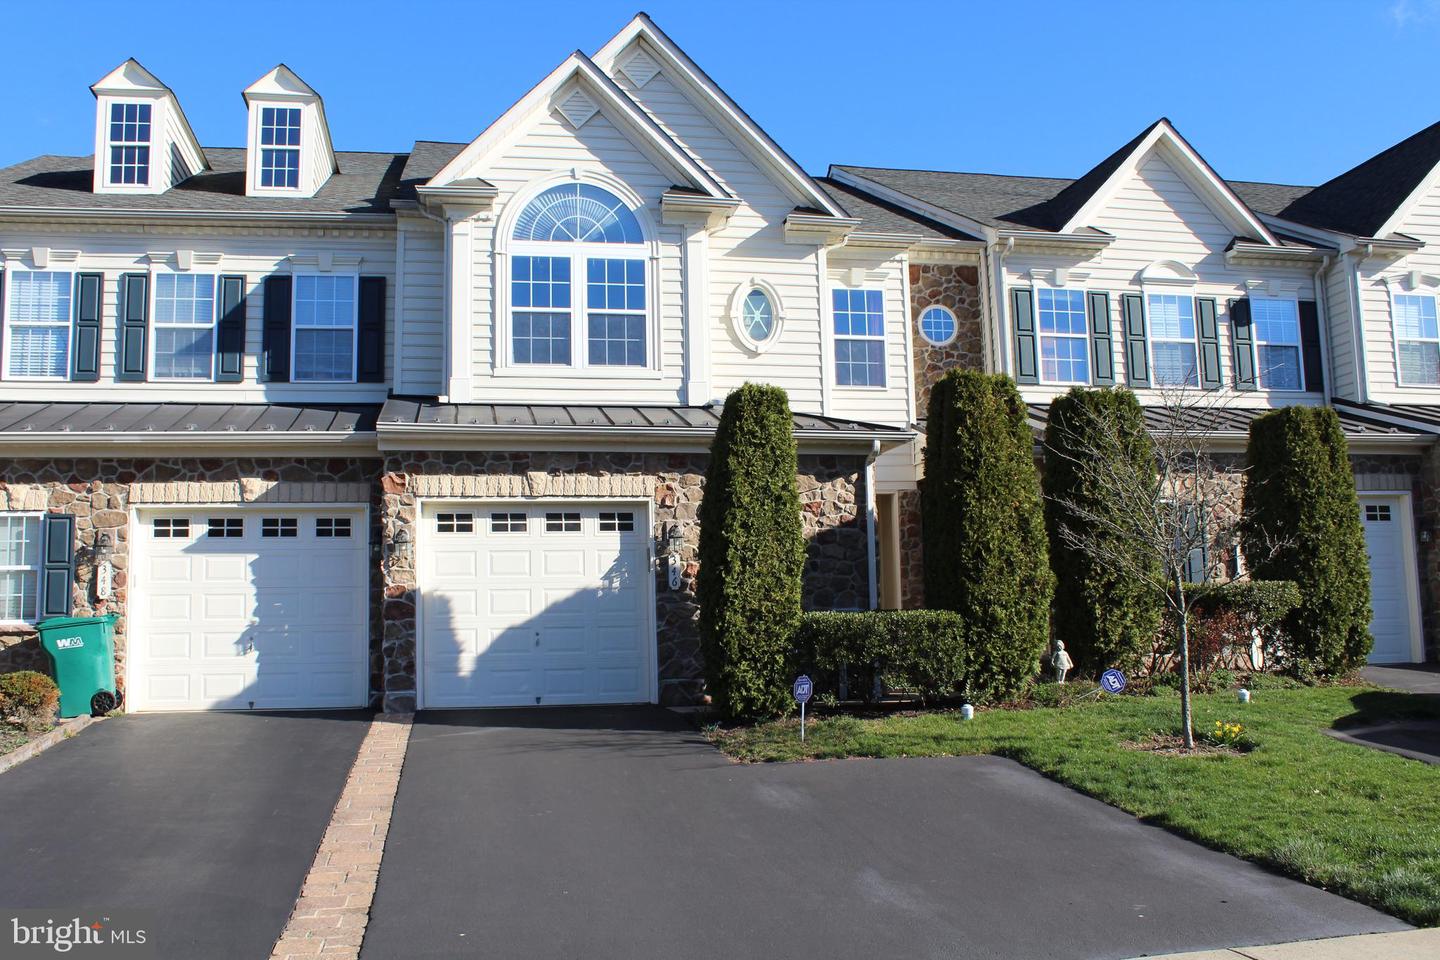 View Chalfont, PA 18914 townhome